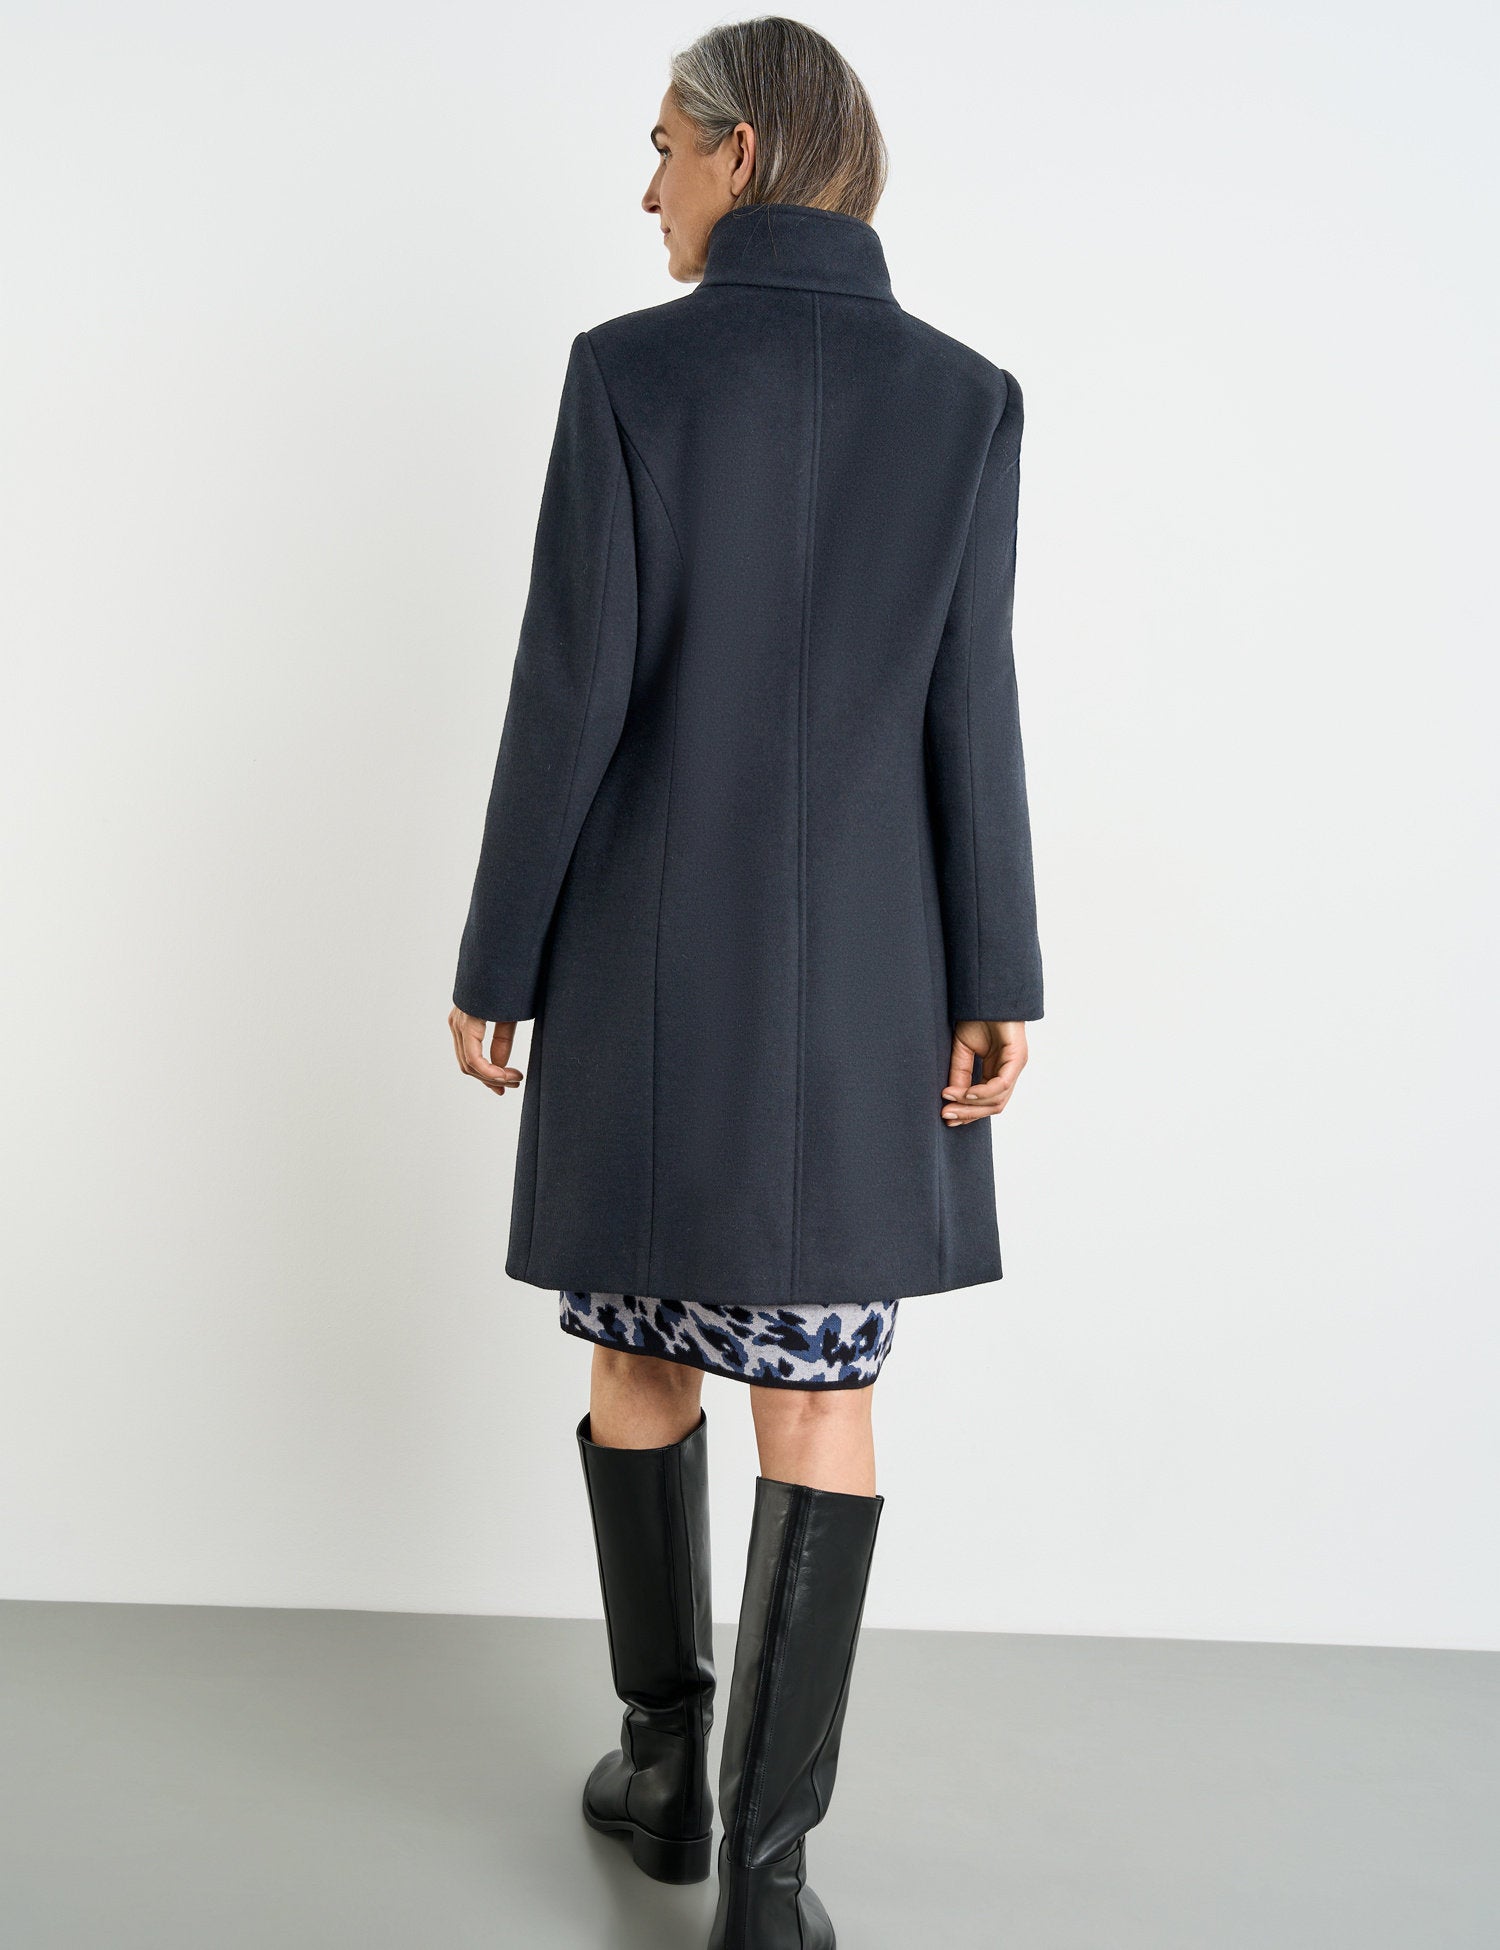 Short Wool Coat With A Stand Up Collar_250235-31131_80880_06